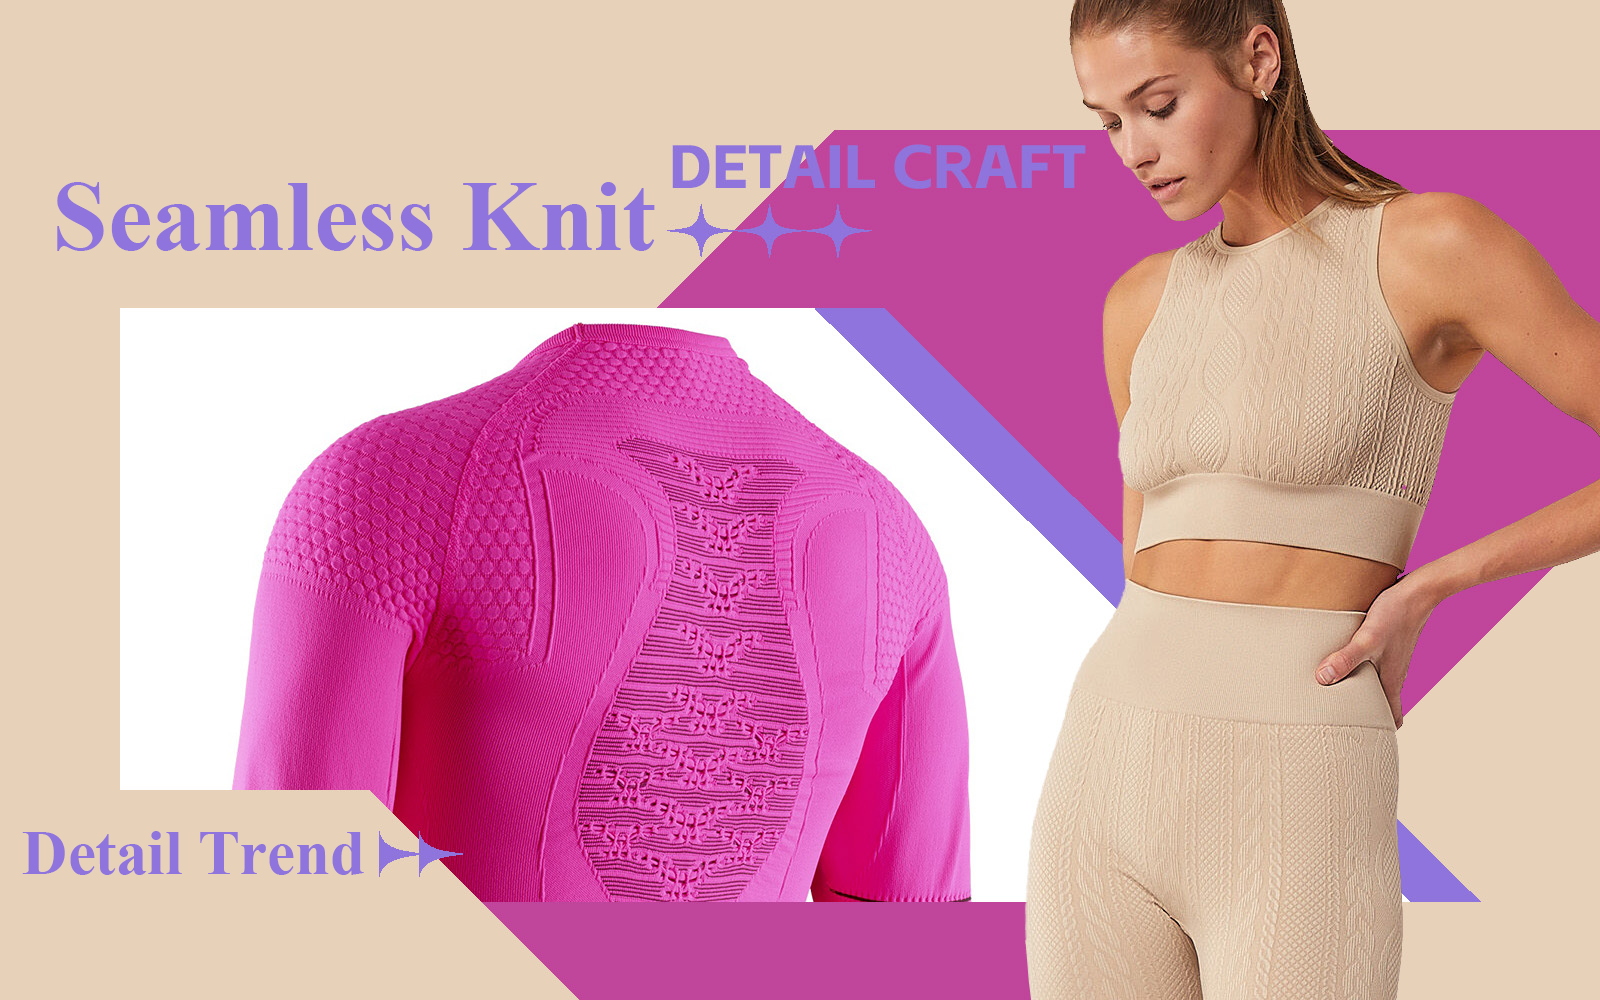 The Detail & Craft Trend for Seamless Knit